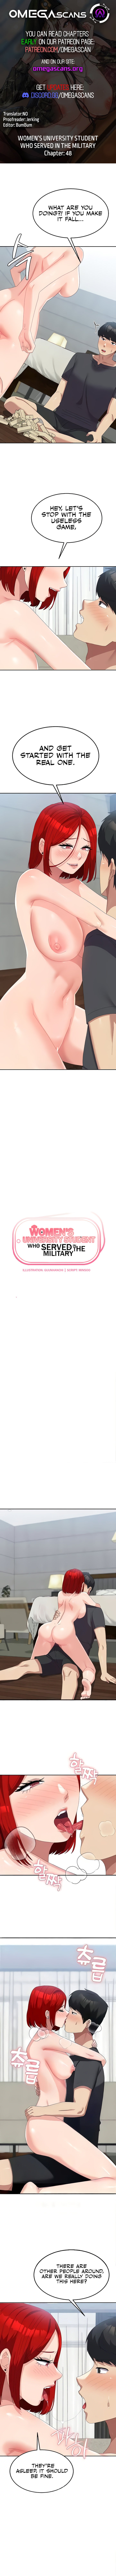 womens-university-student-who-served-in-the-military-chap-48-0